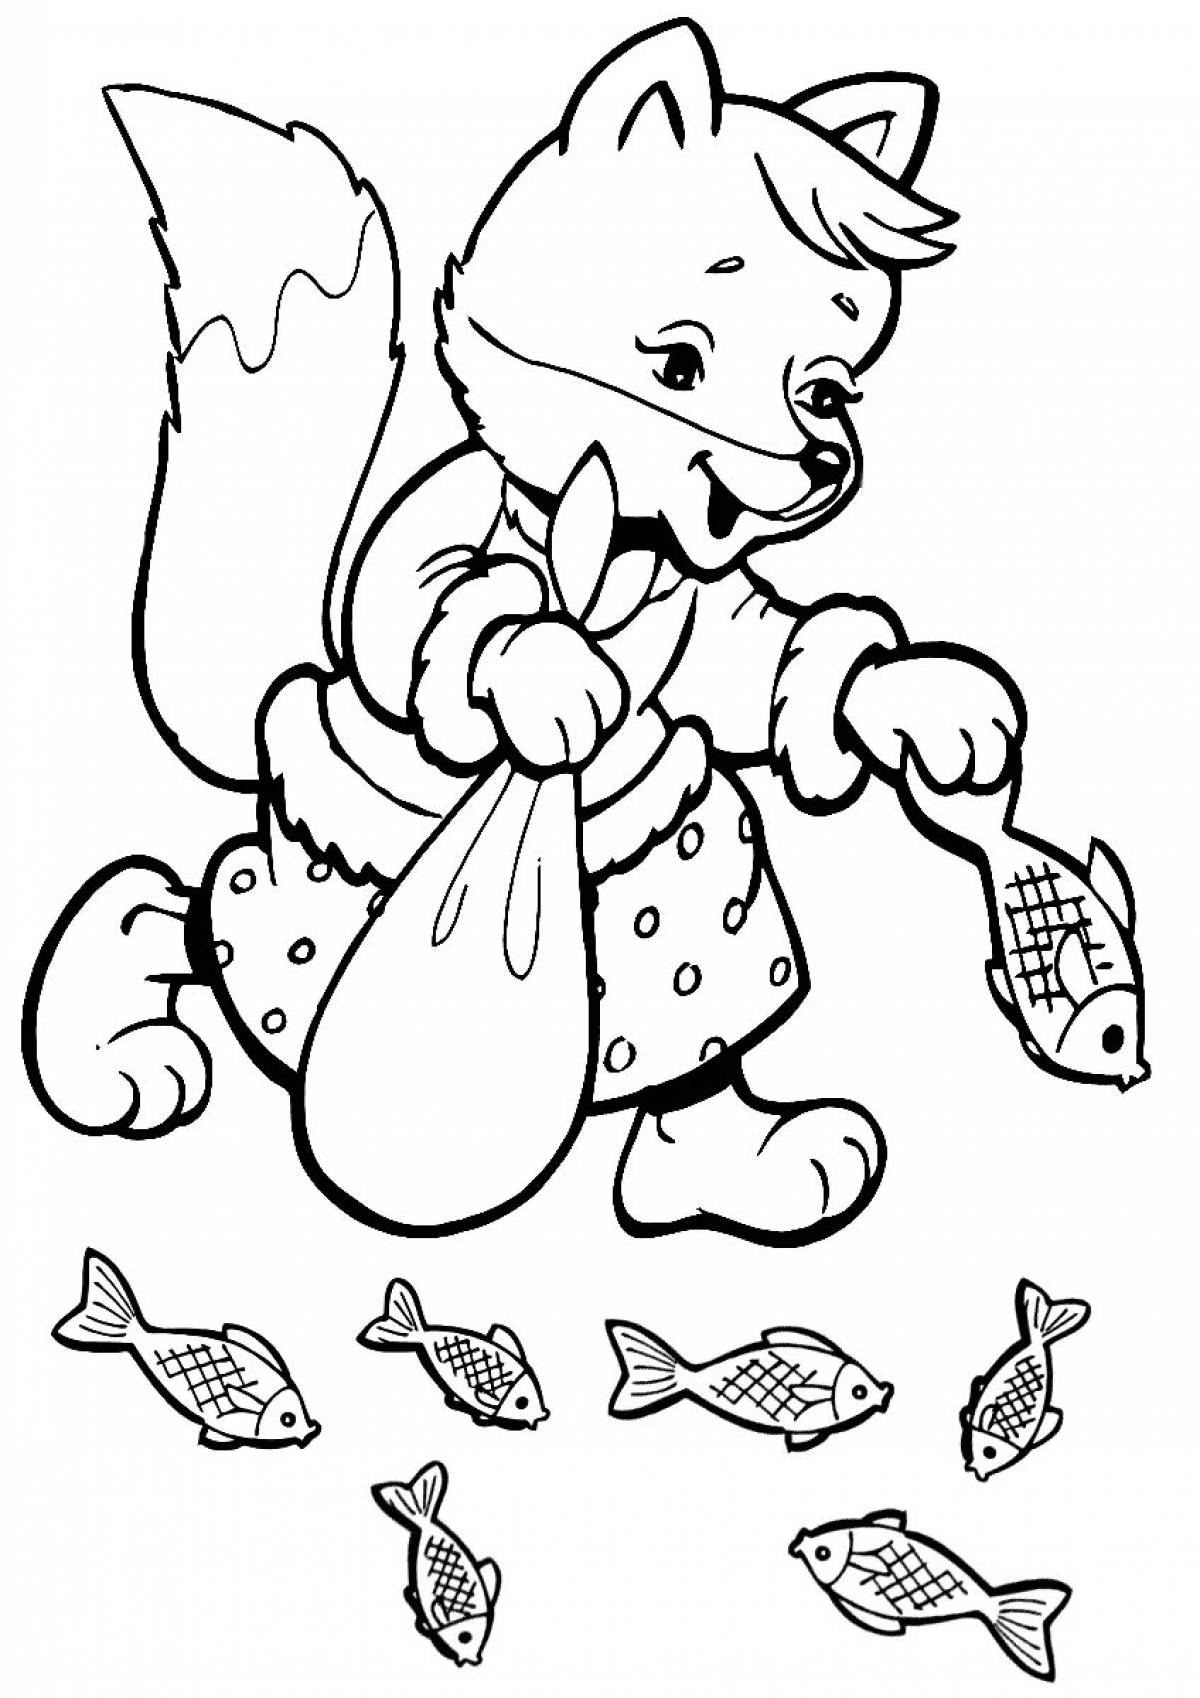 Cute fox and wolf coloring pages for kids